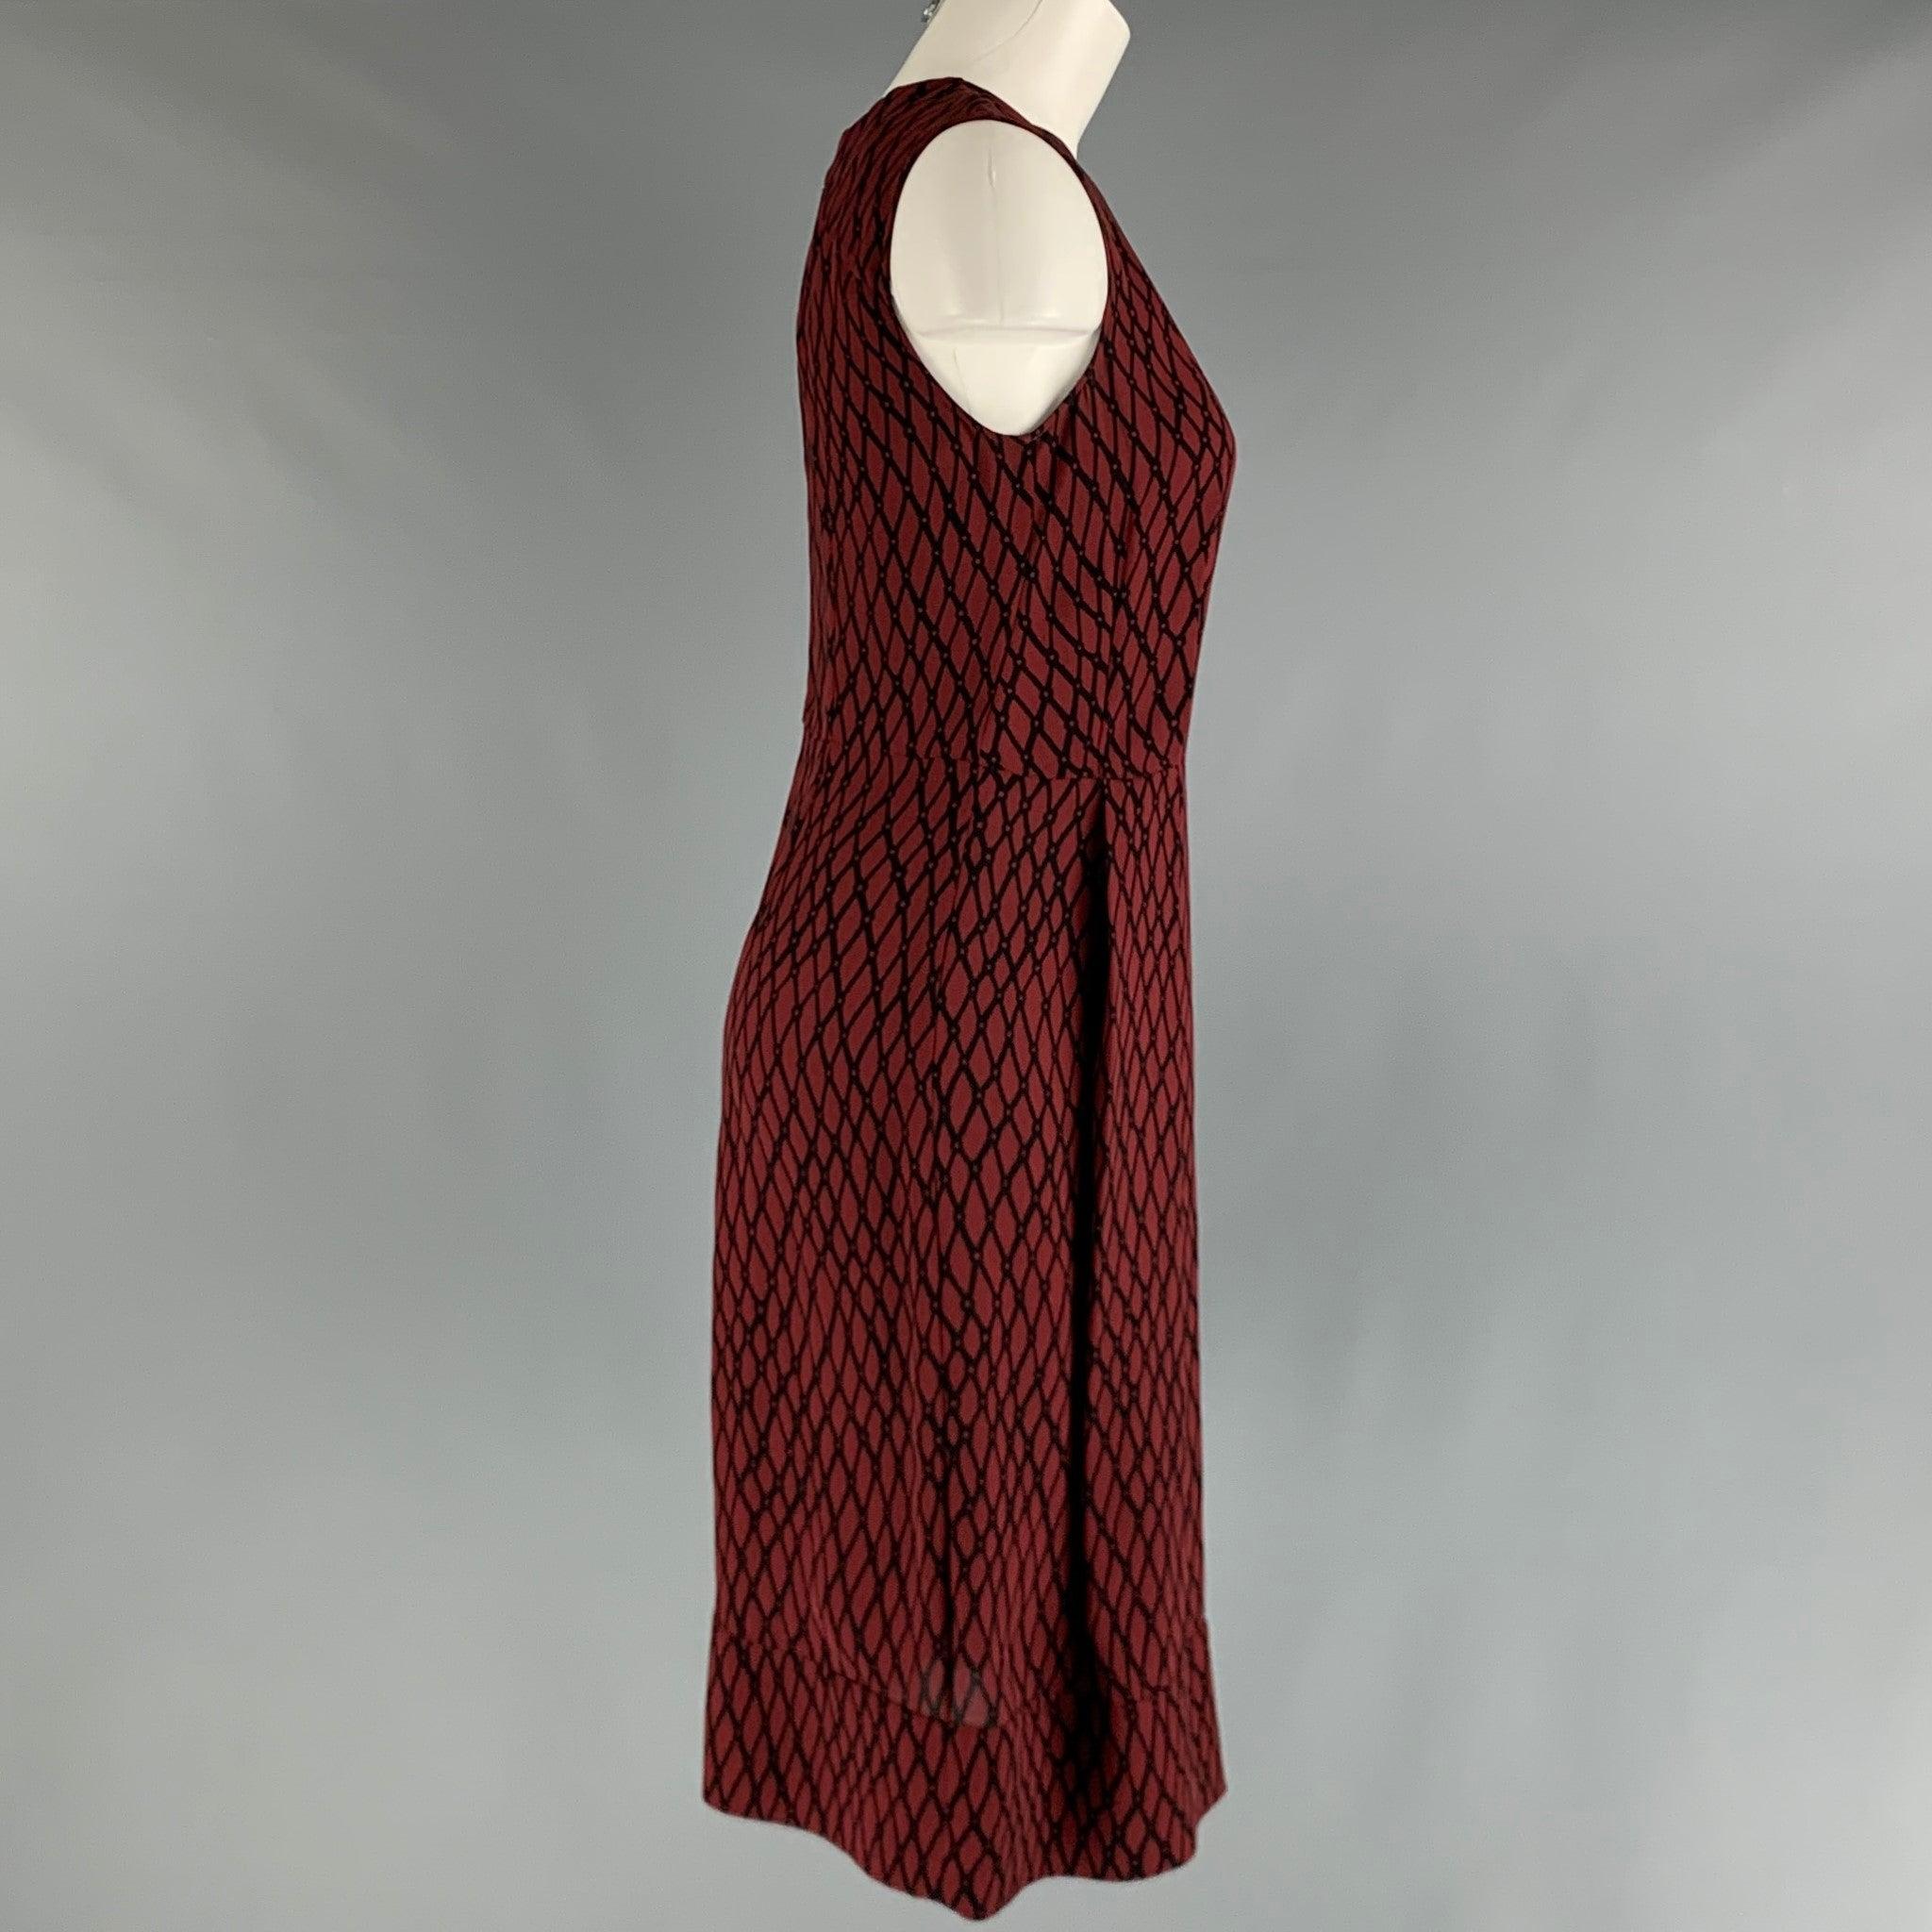 MARNI Size 2 Burgundy Black Viscose Rhombus Sleeveless Dress In Excellent Condition For Sale In San Francisco, CA